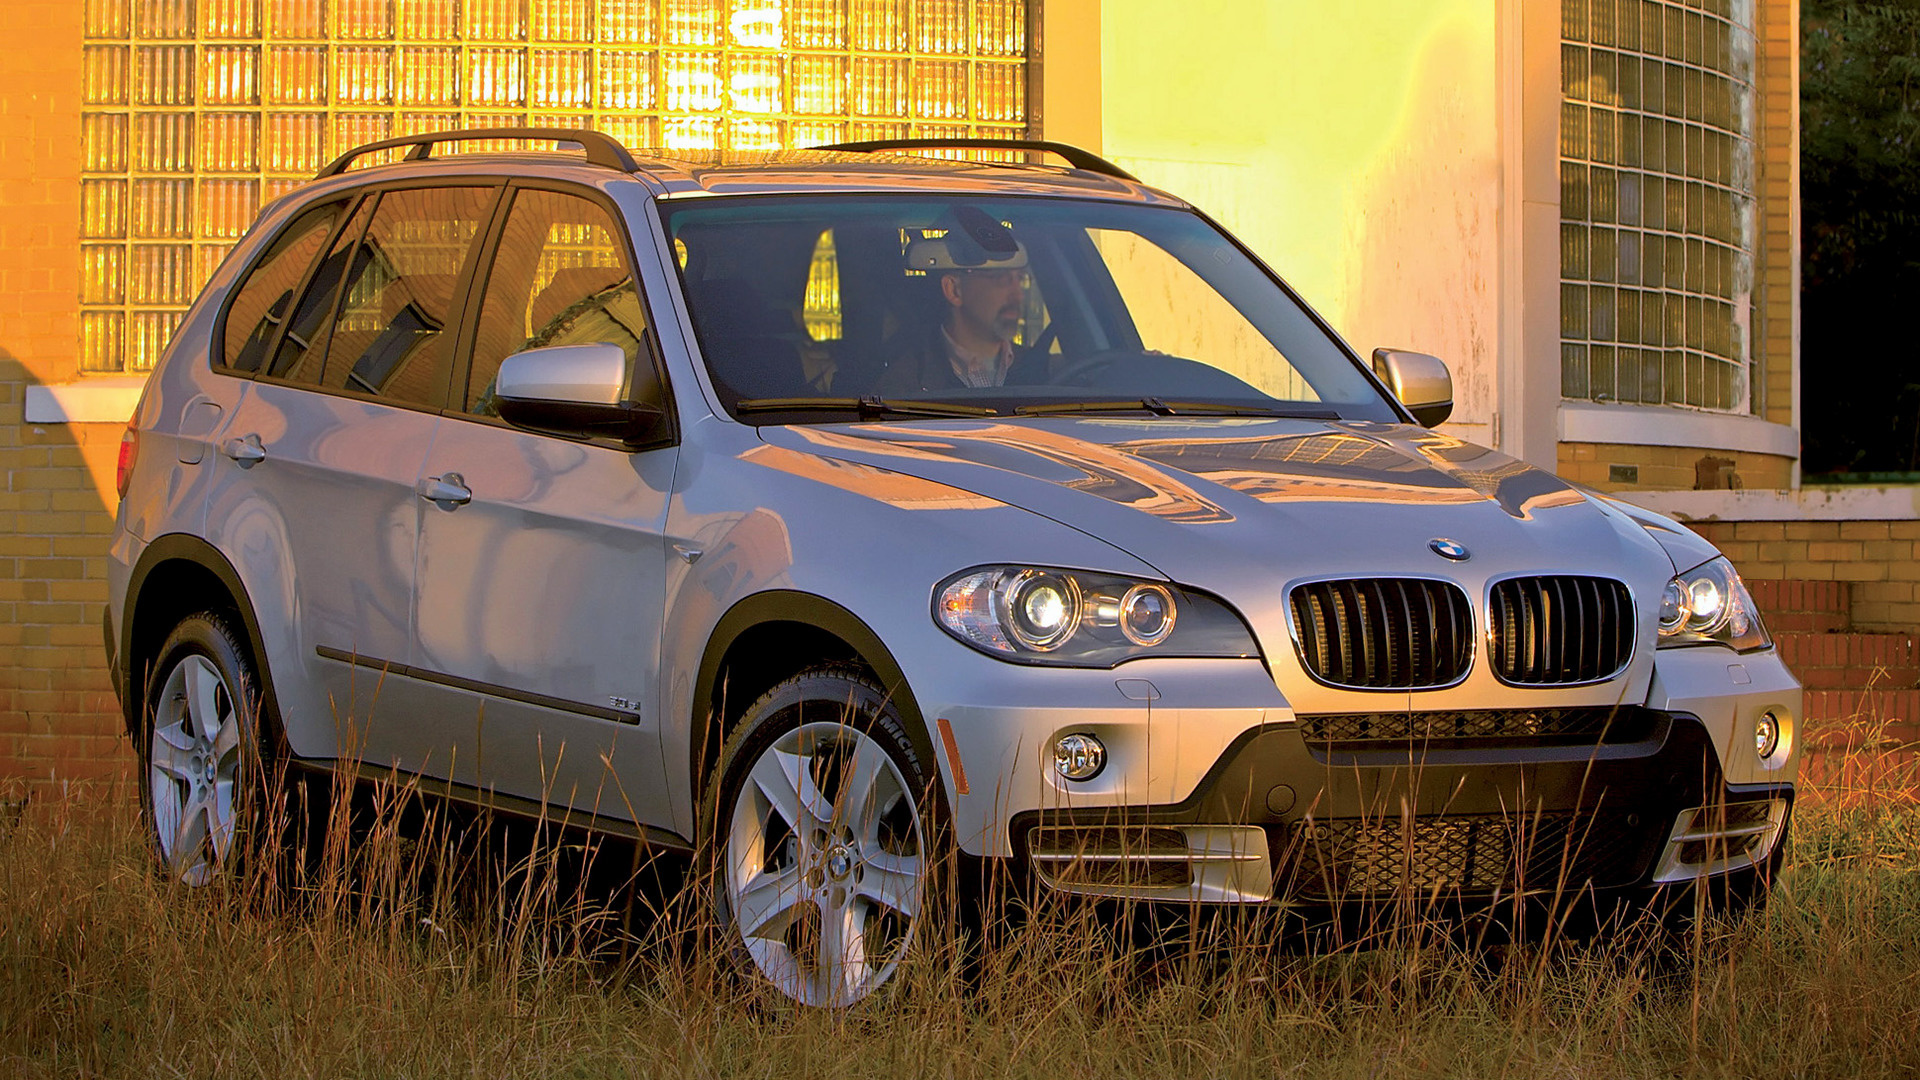 2008 BMW X5 (US) - Wallpapers and HD Images | Car Pixel